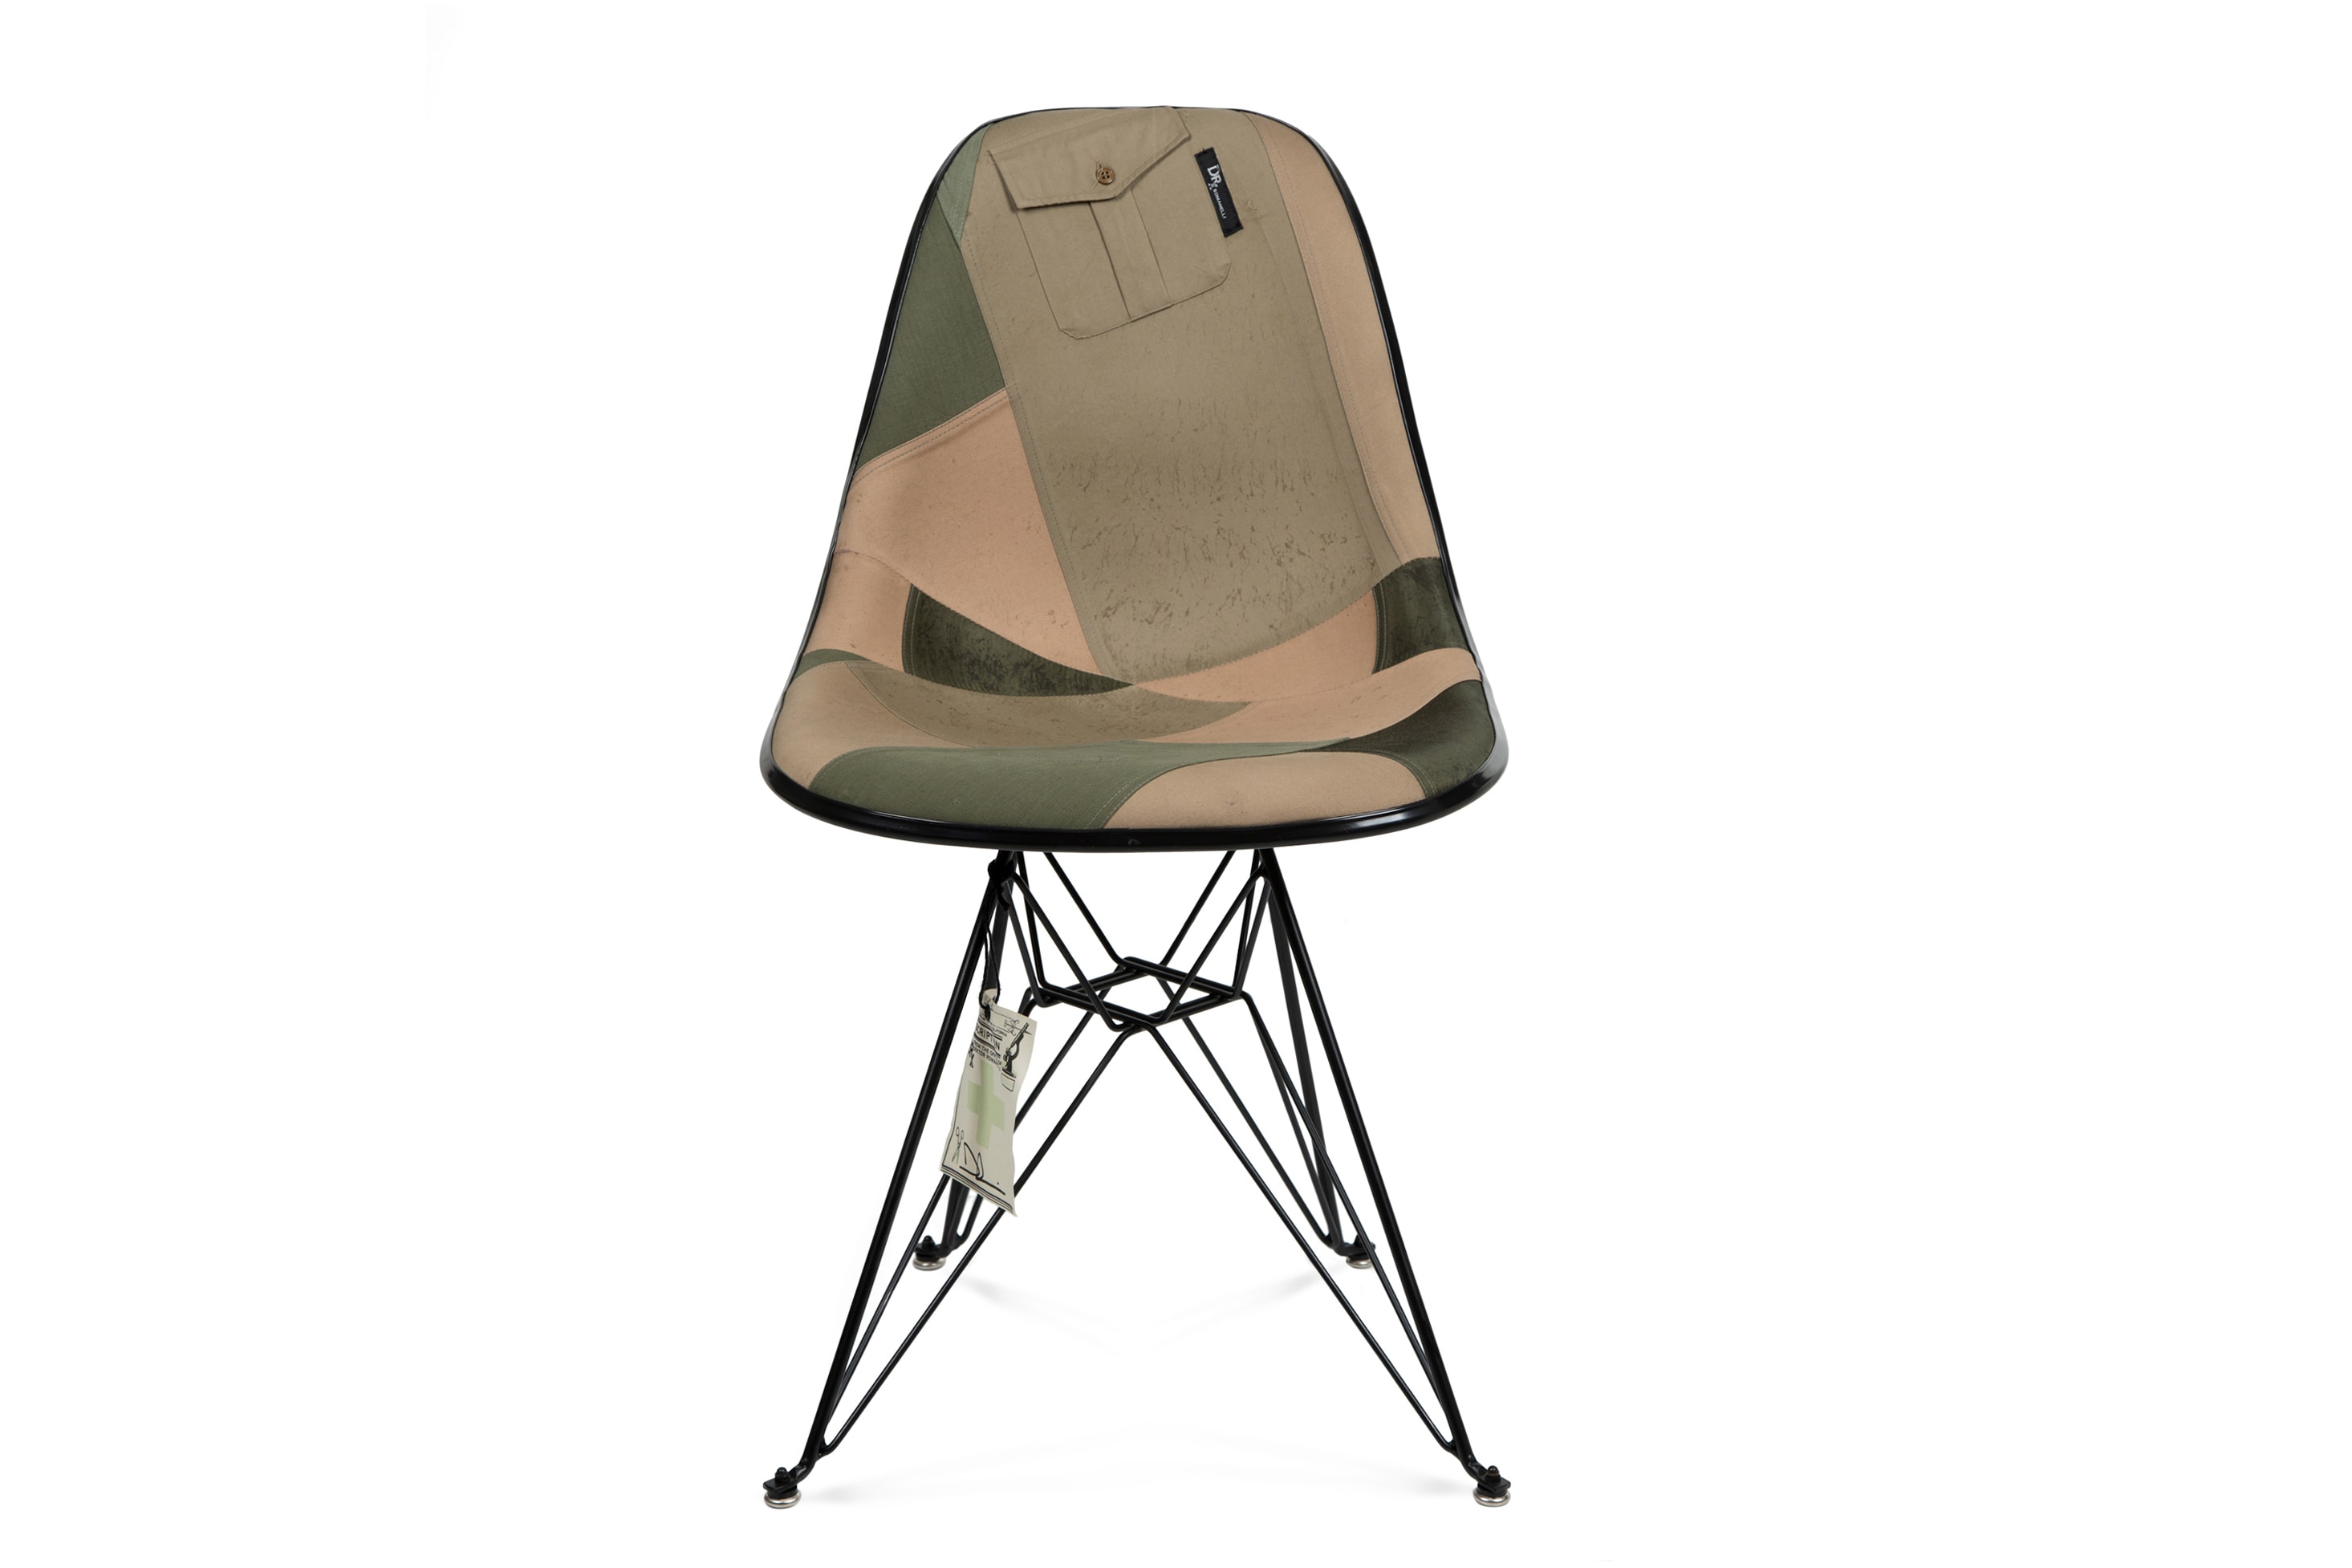 Modernica & DRx Romanelli Release Vintage Military Chair Collection Case Study Side Shell Eiffel chair